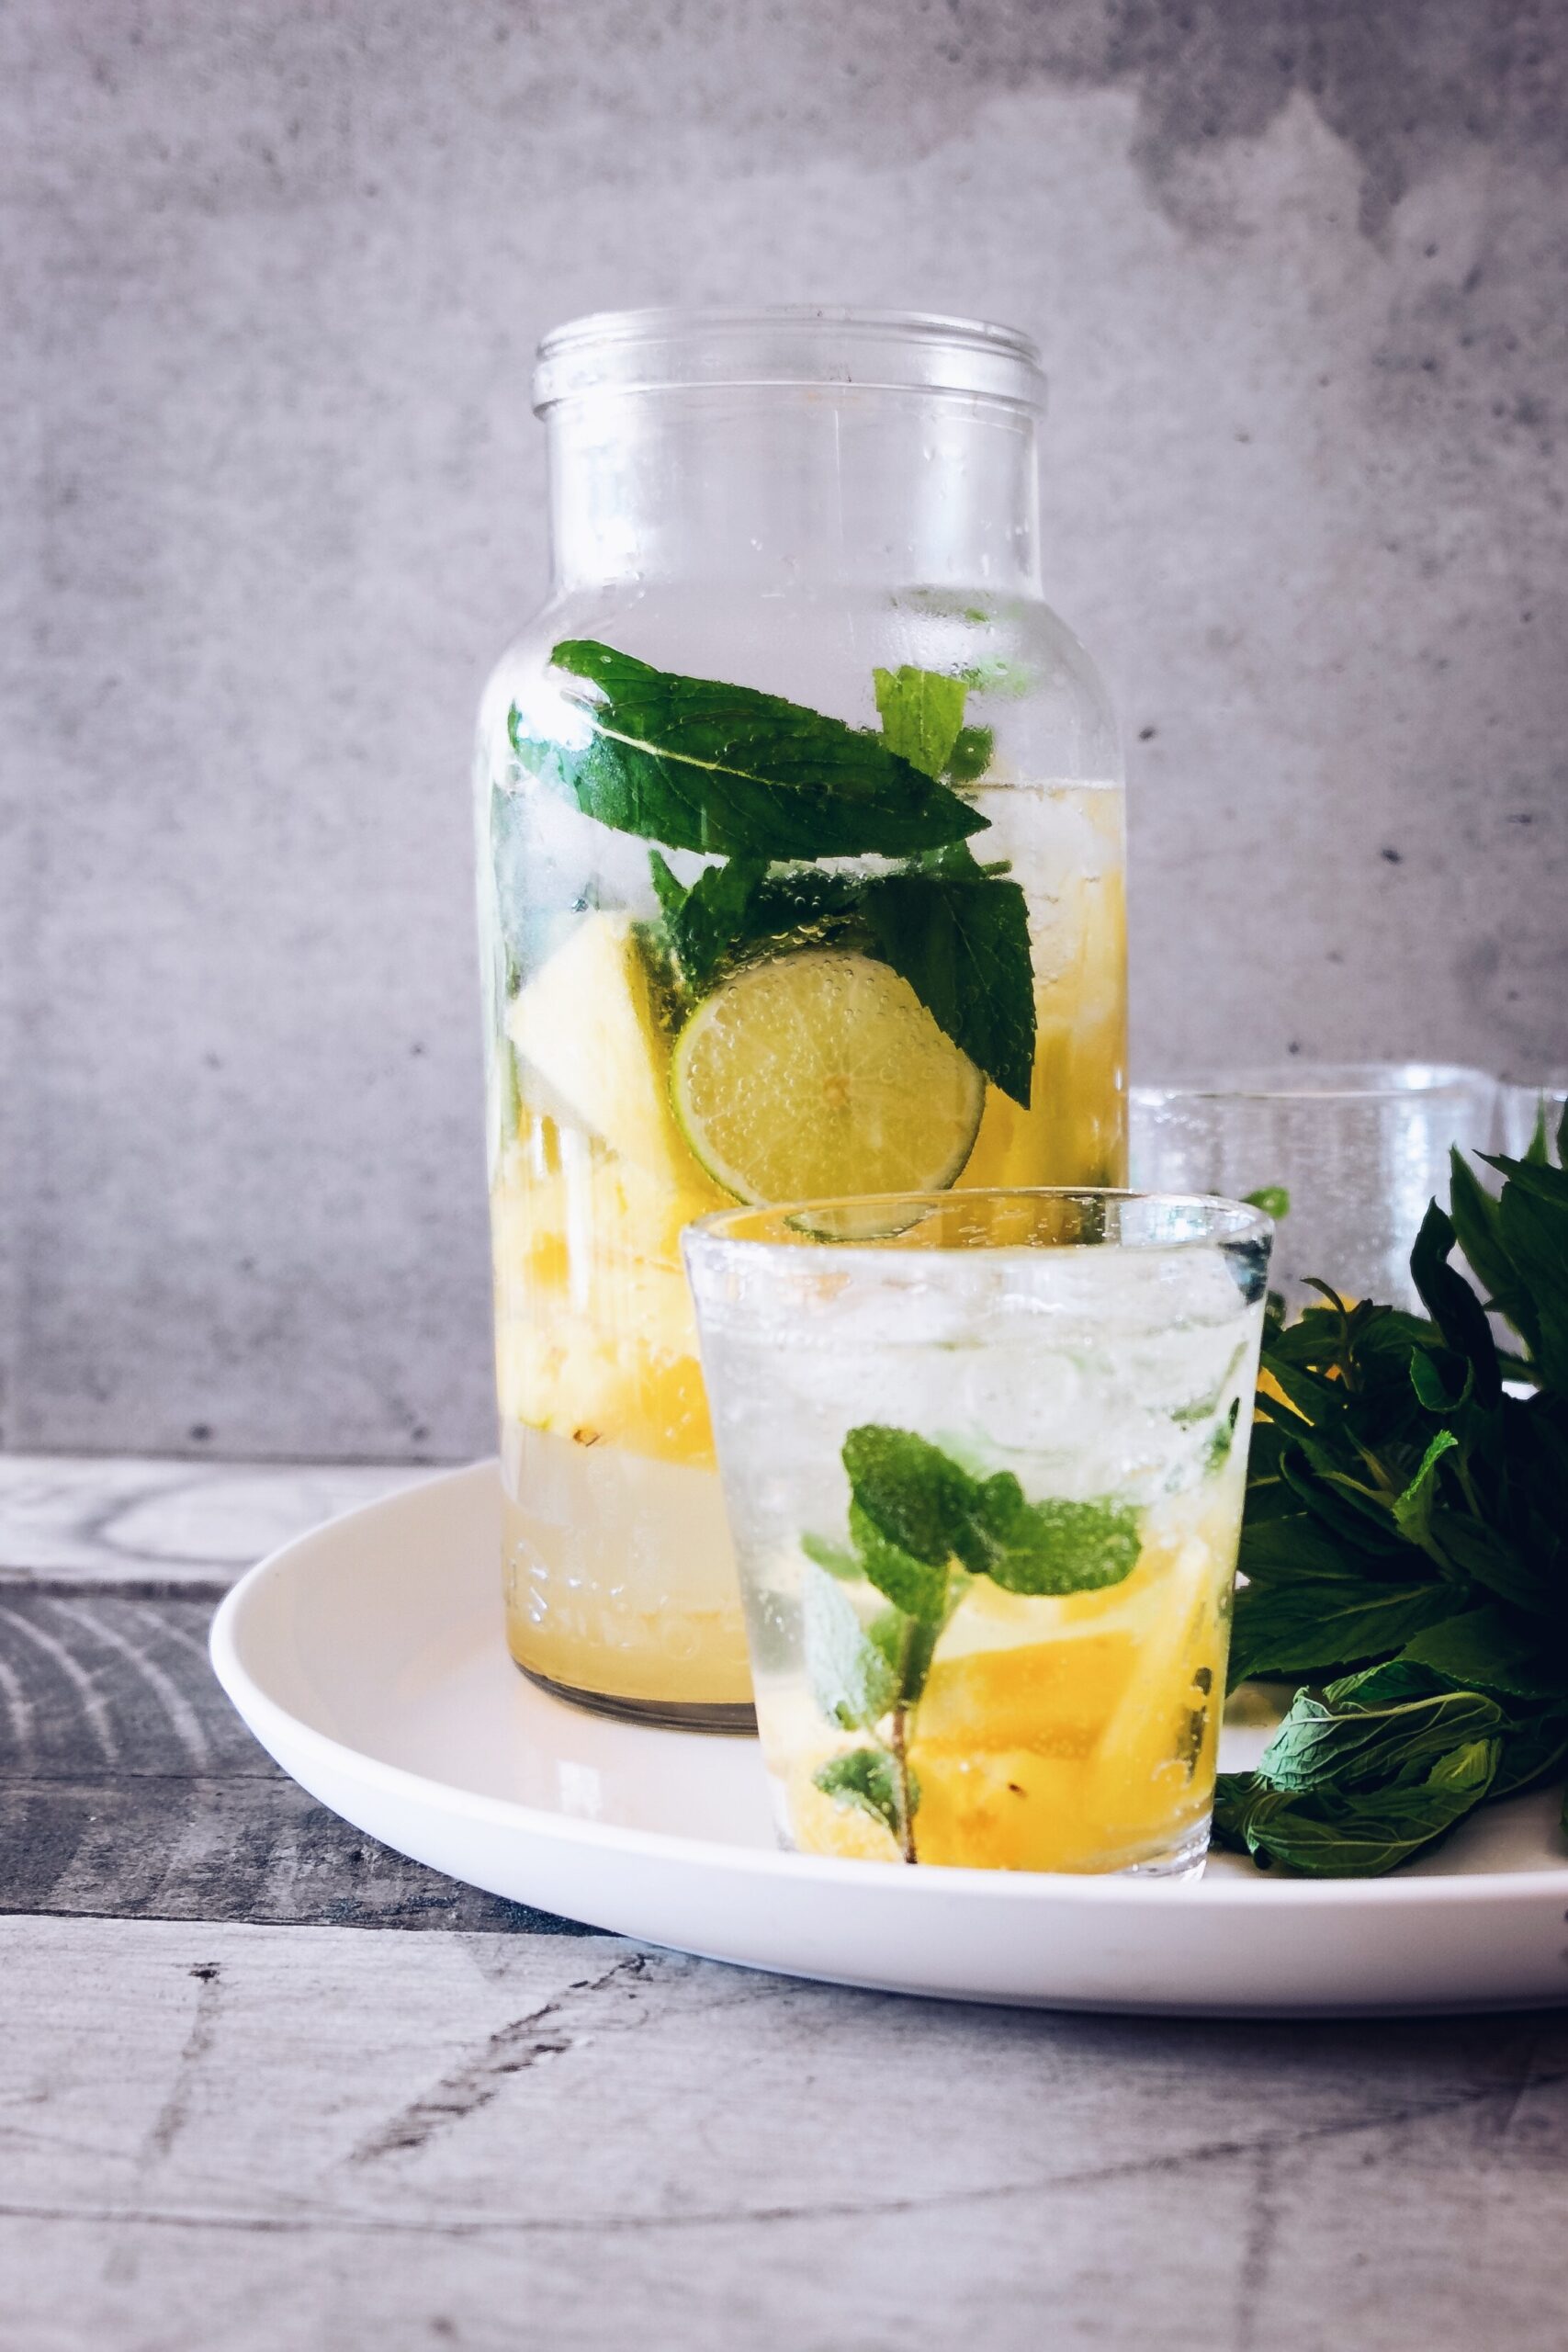 Refreshing pineapple, peach, mango and rosemary water: a combination full of flavor and benefits